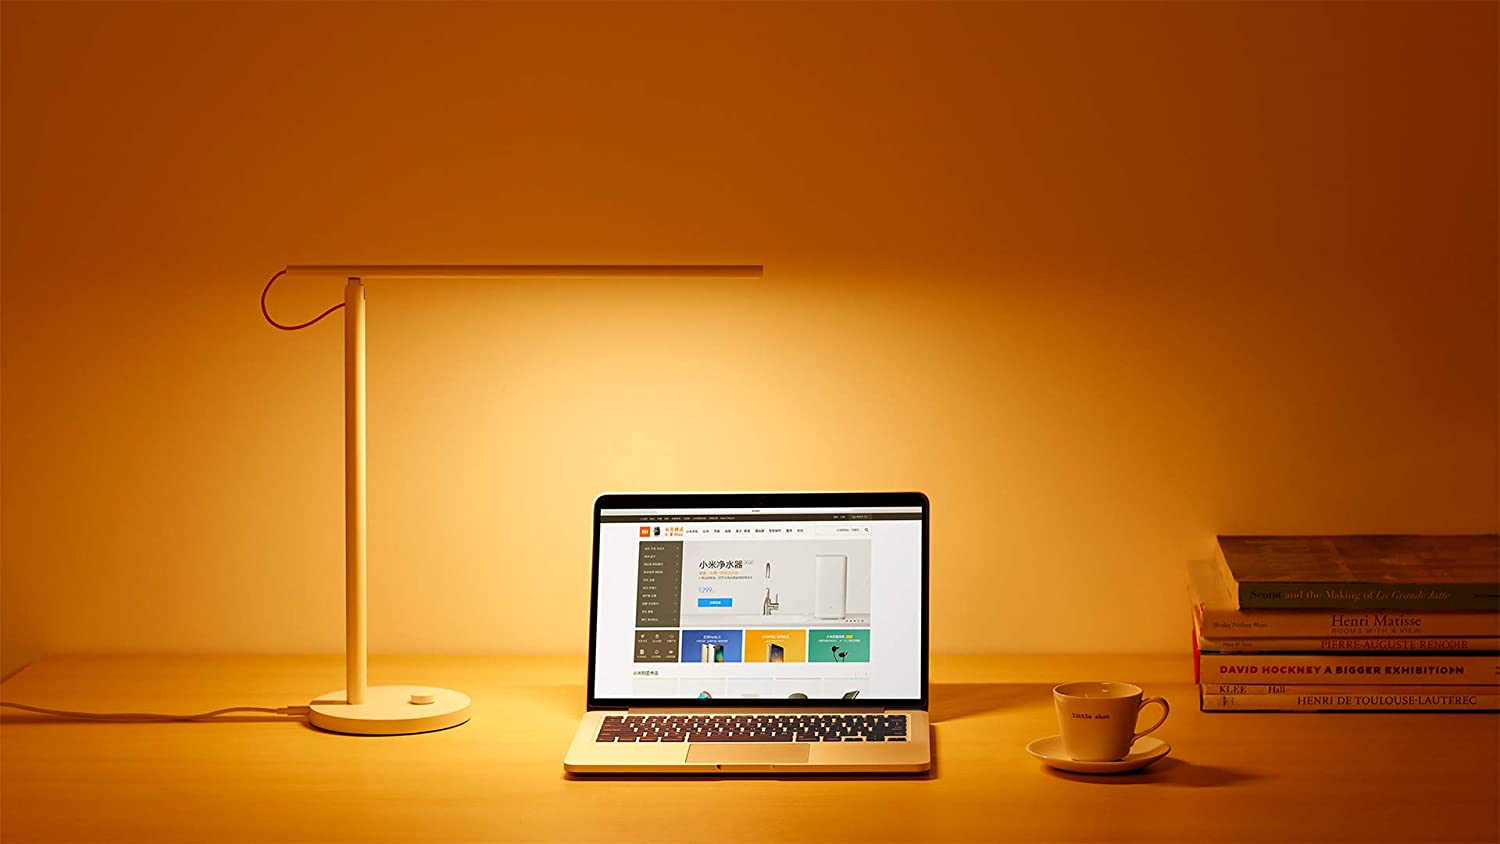 Xiaomi LED Desk Lamp 1s – Review and Giveaway